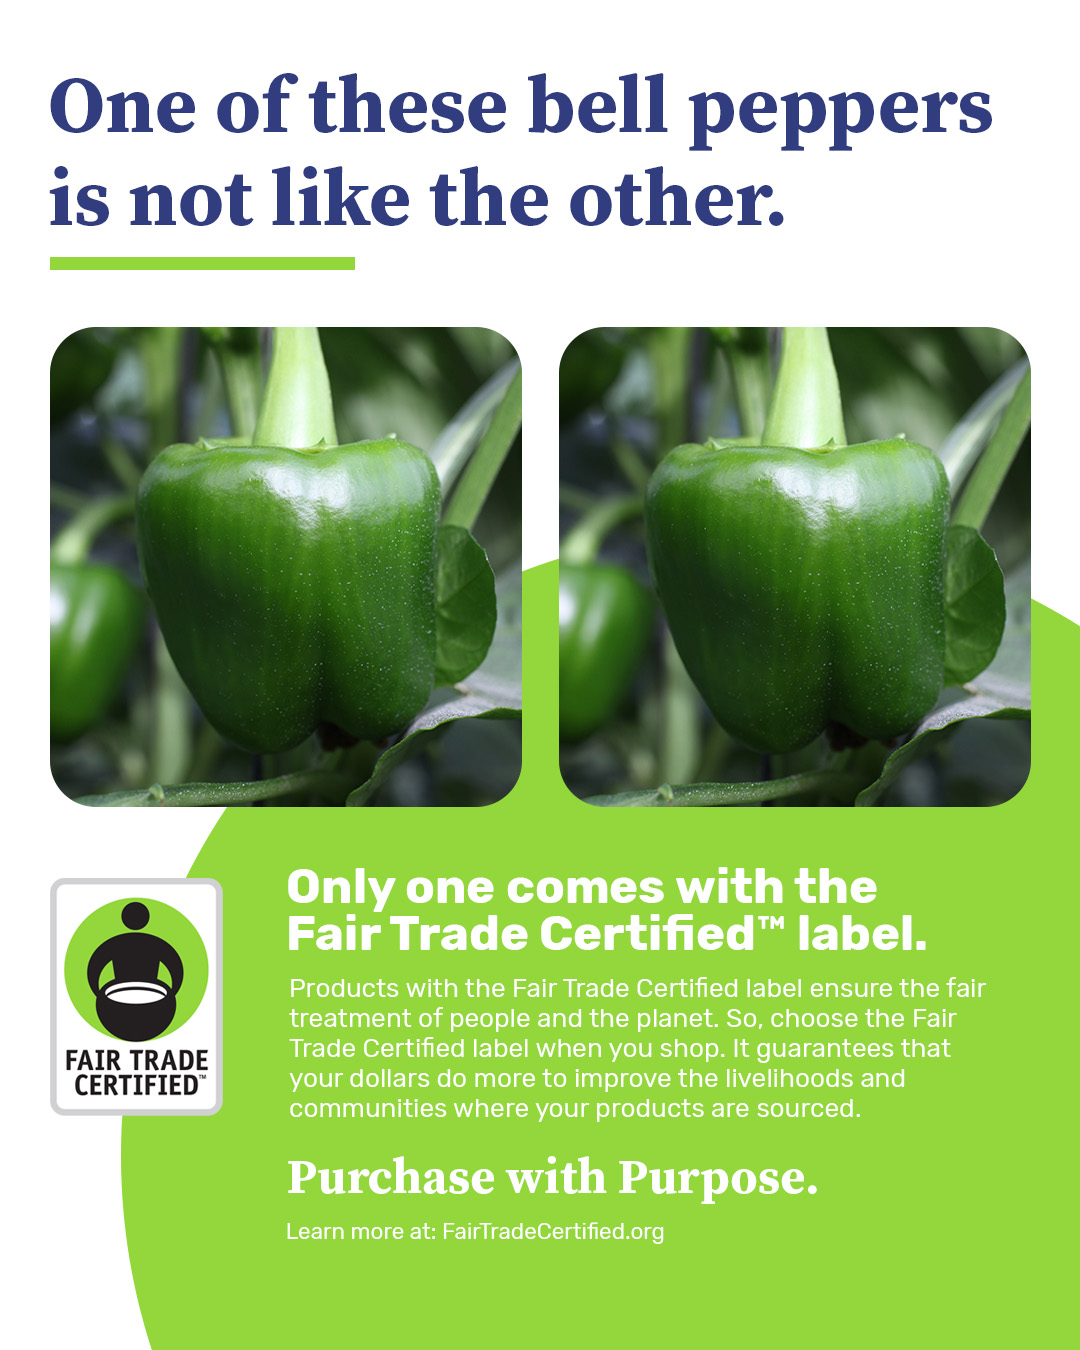 An ad from Fair Trade Certified's 'Purchase With Purpose' campaign that shows two identical photos of bell peppers, but explains that one is not like the other because one features the Fair Trade Certified label.